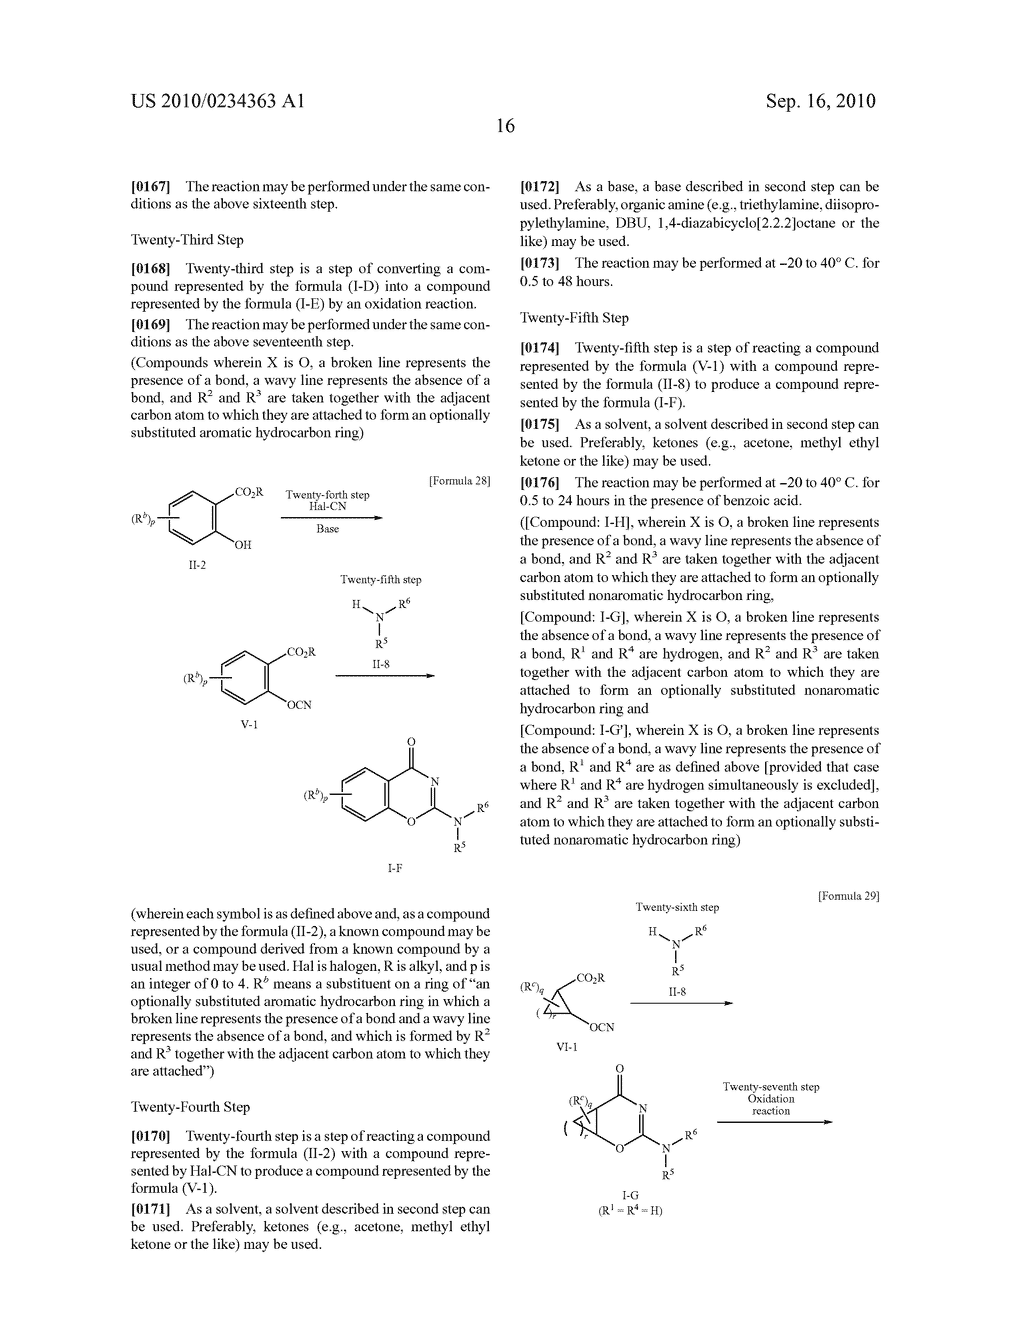 HETEROCYCLIC DERIVATIVE HAVING INHIBITORY ACTIVITY ON TYPE-I 11 DATA-HYDROXYSTEROID DEHYDROGENASE - diagram, schematic, and image 17